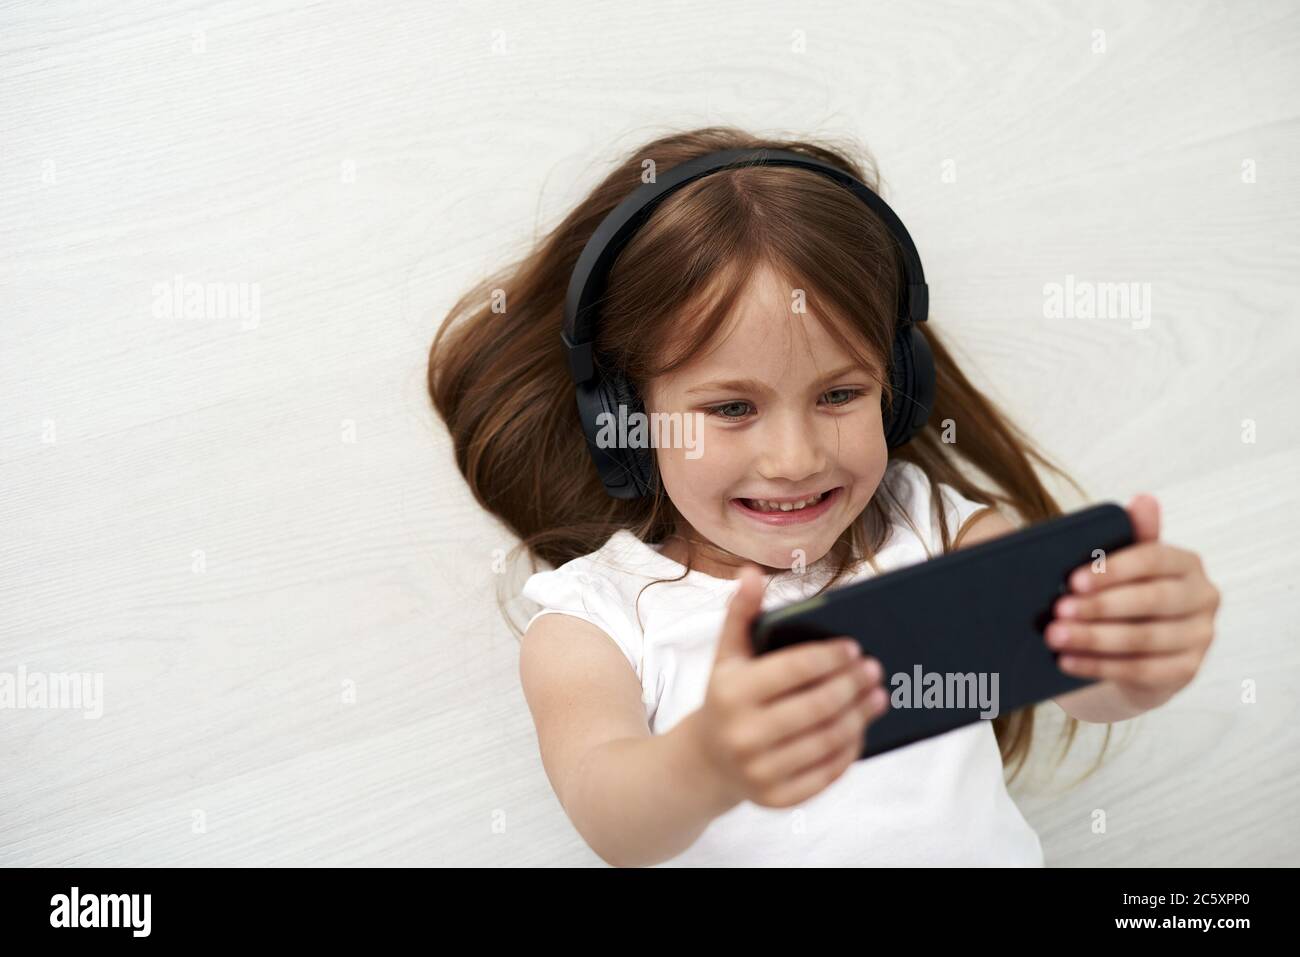 The little is laying on the floor. The girl is holding phone. The little girl is playing phone on the background. Stock Photo